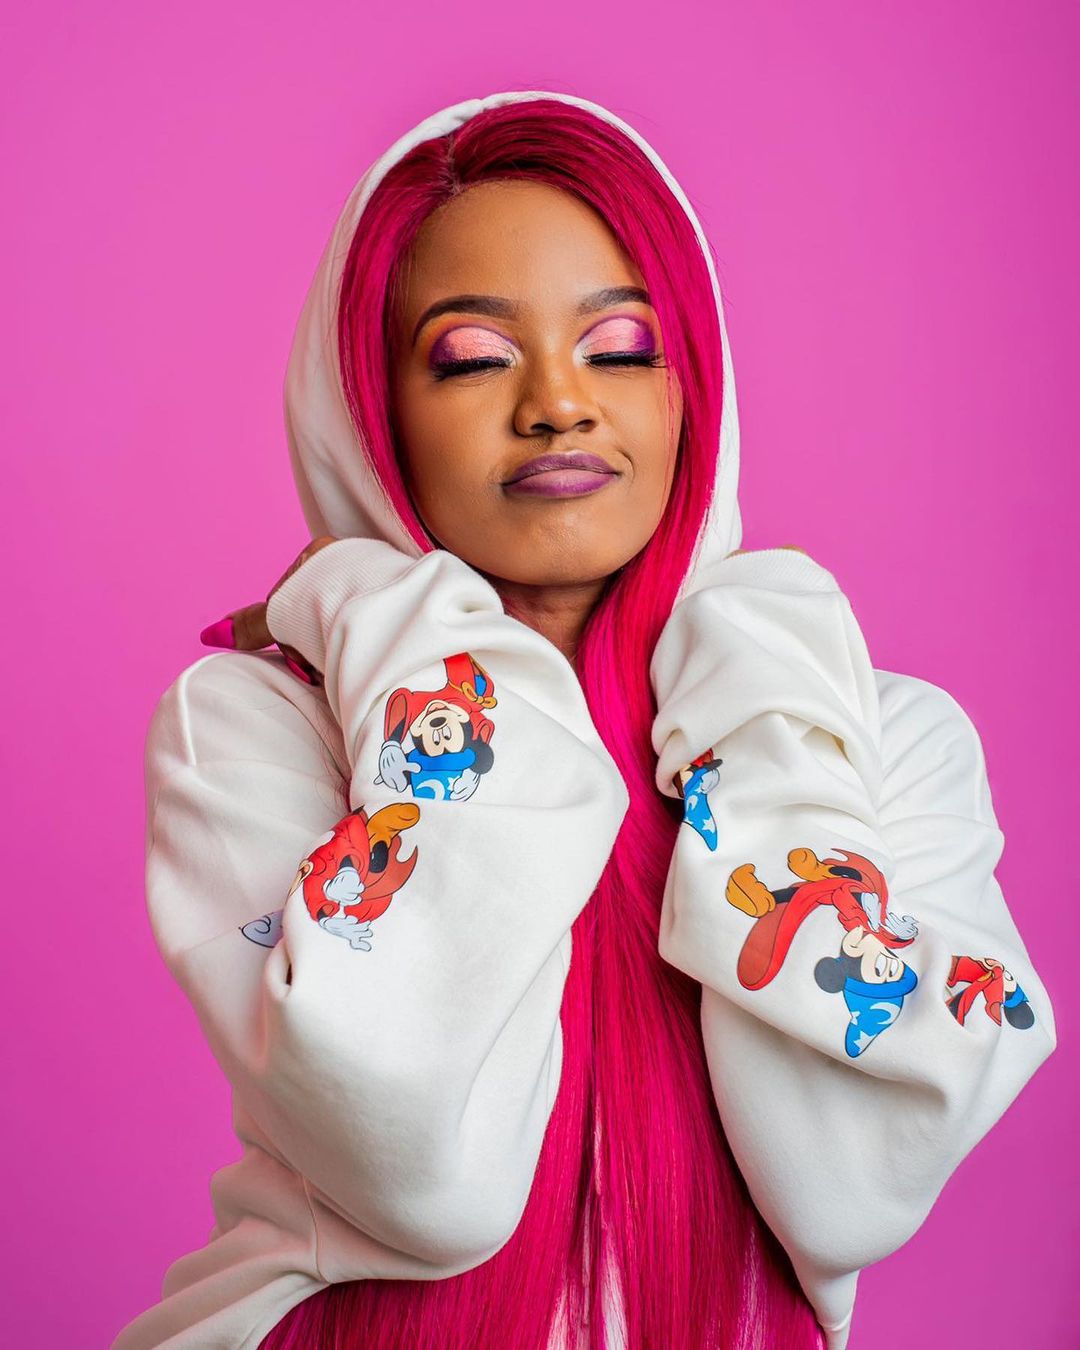 I’m lonely and h0rny – Babes Wodumo speaks out